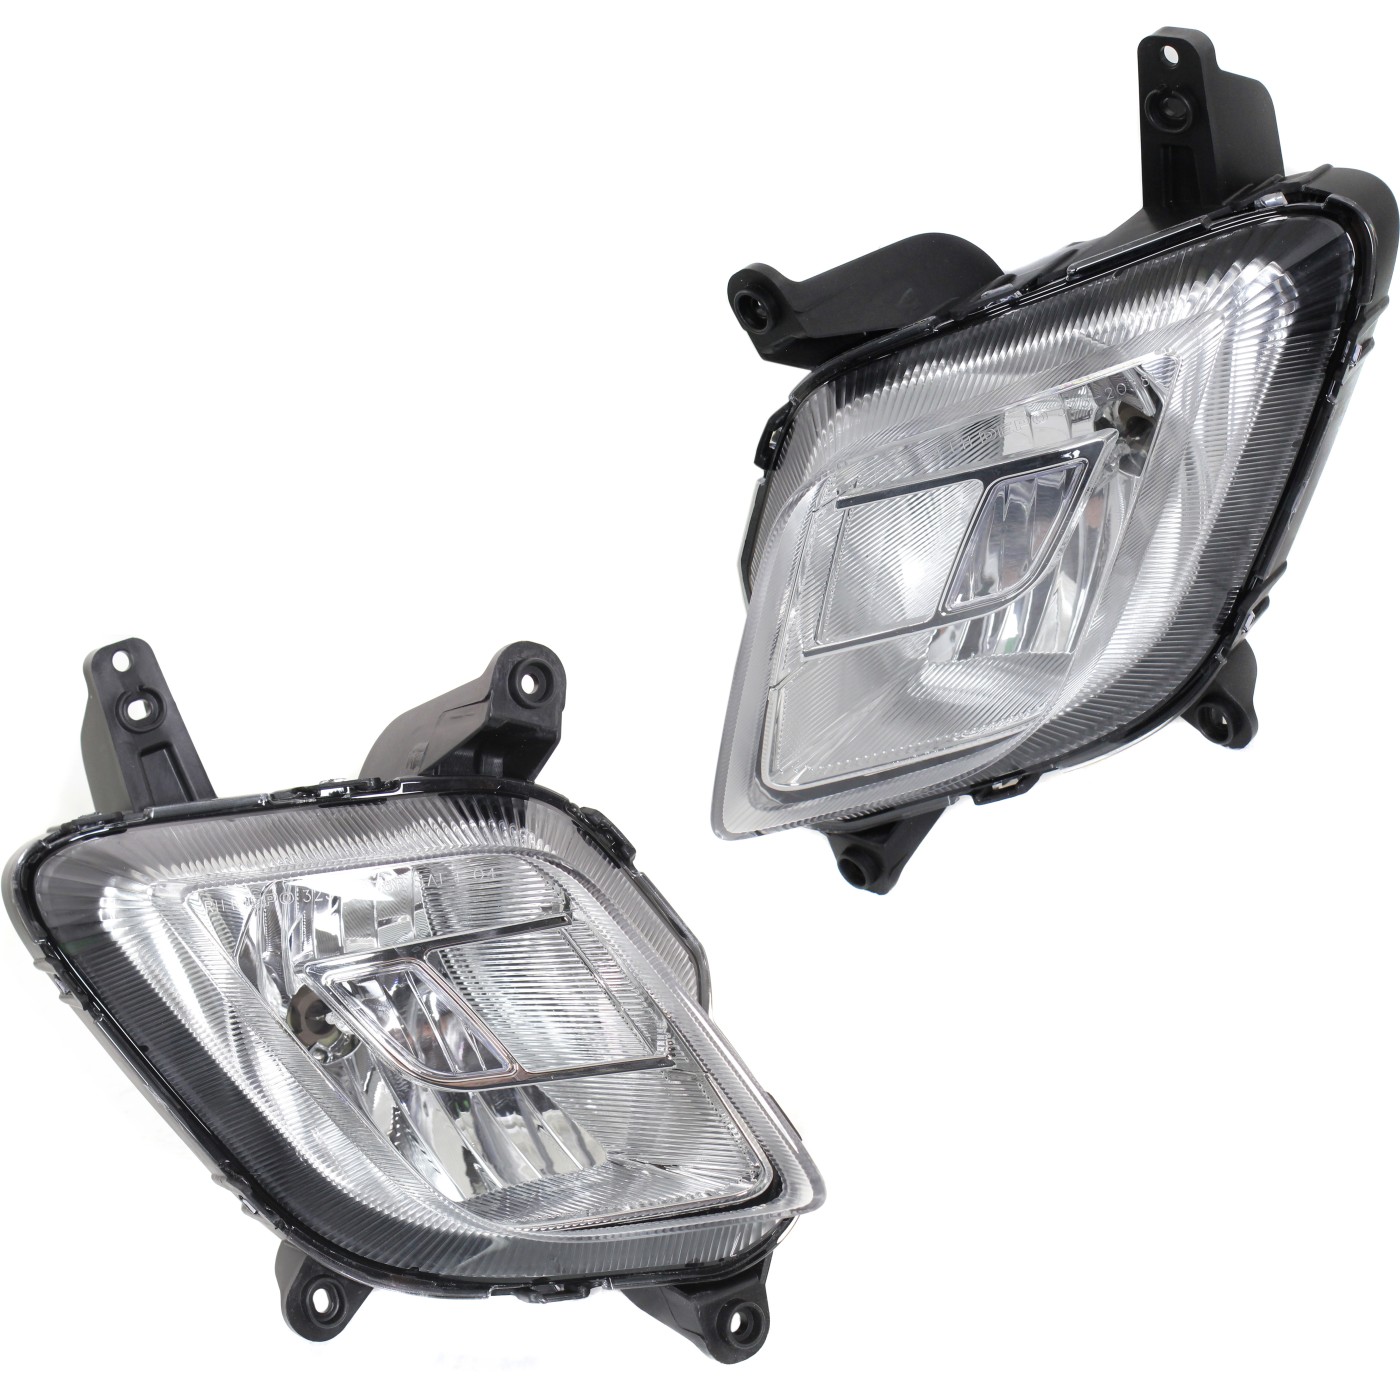 Fog Light For 20142016 Kia Sportage Set of 2 Front Left and Right CAPA